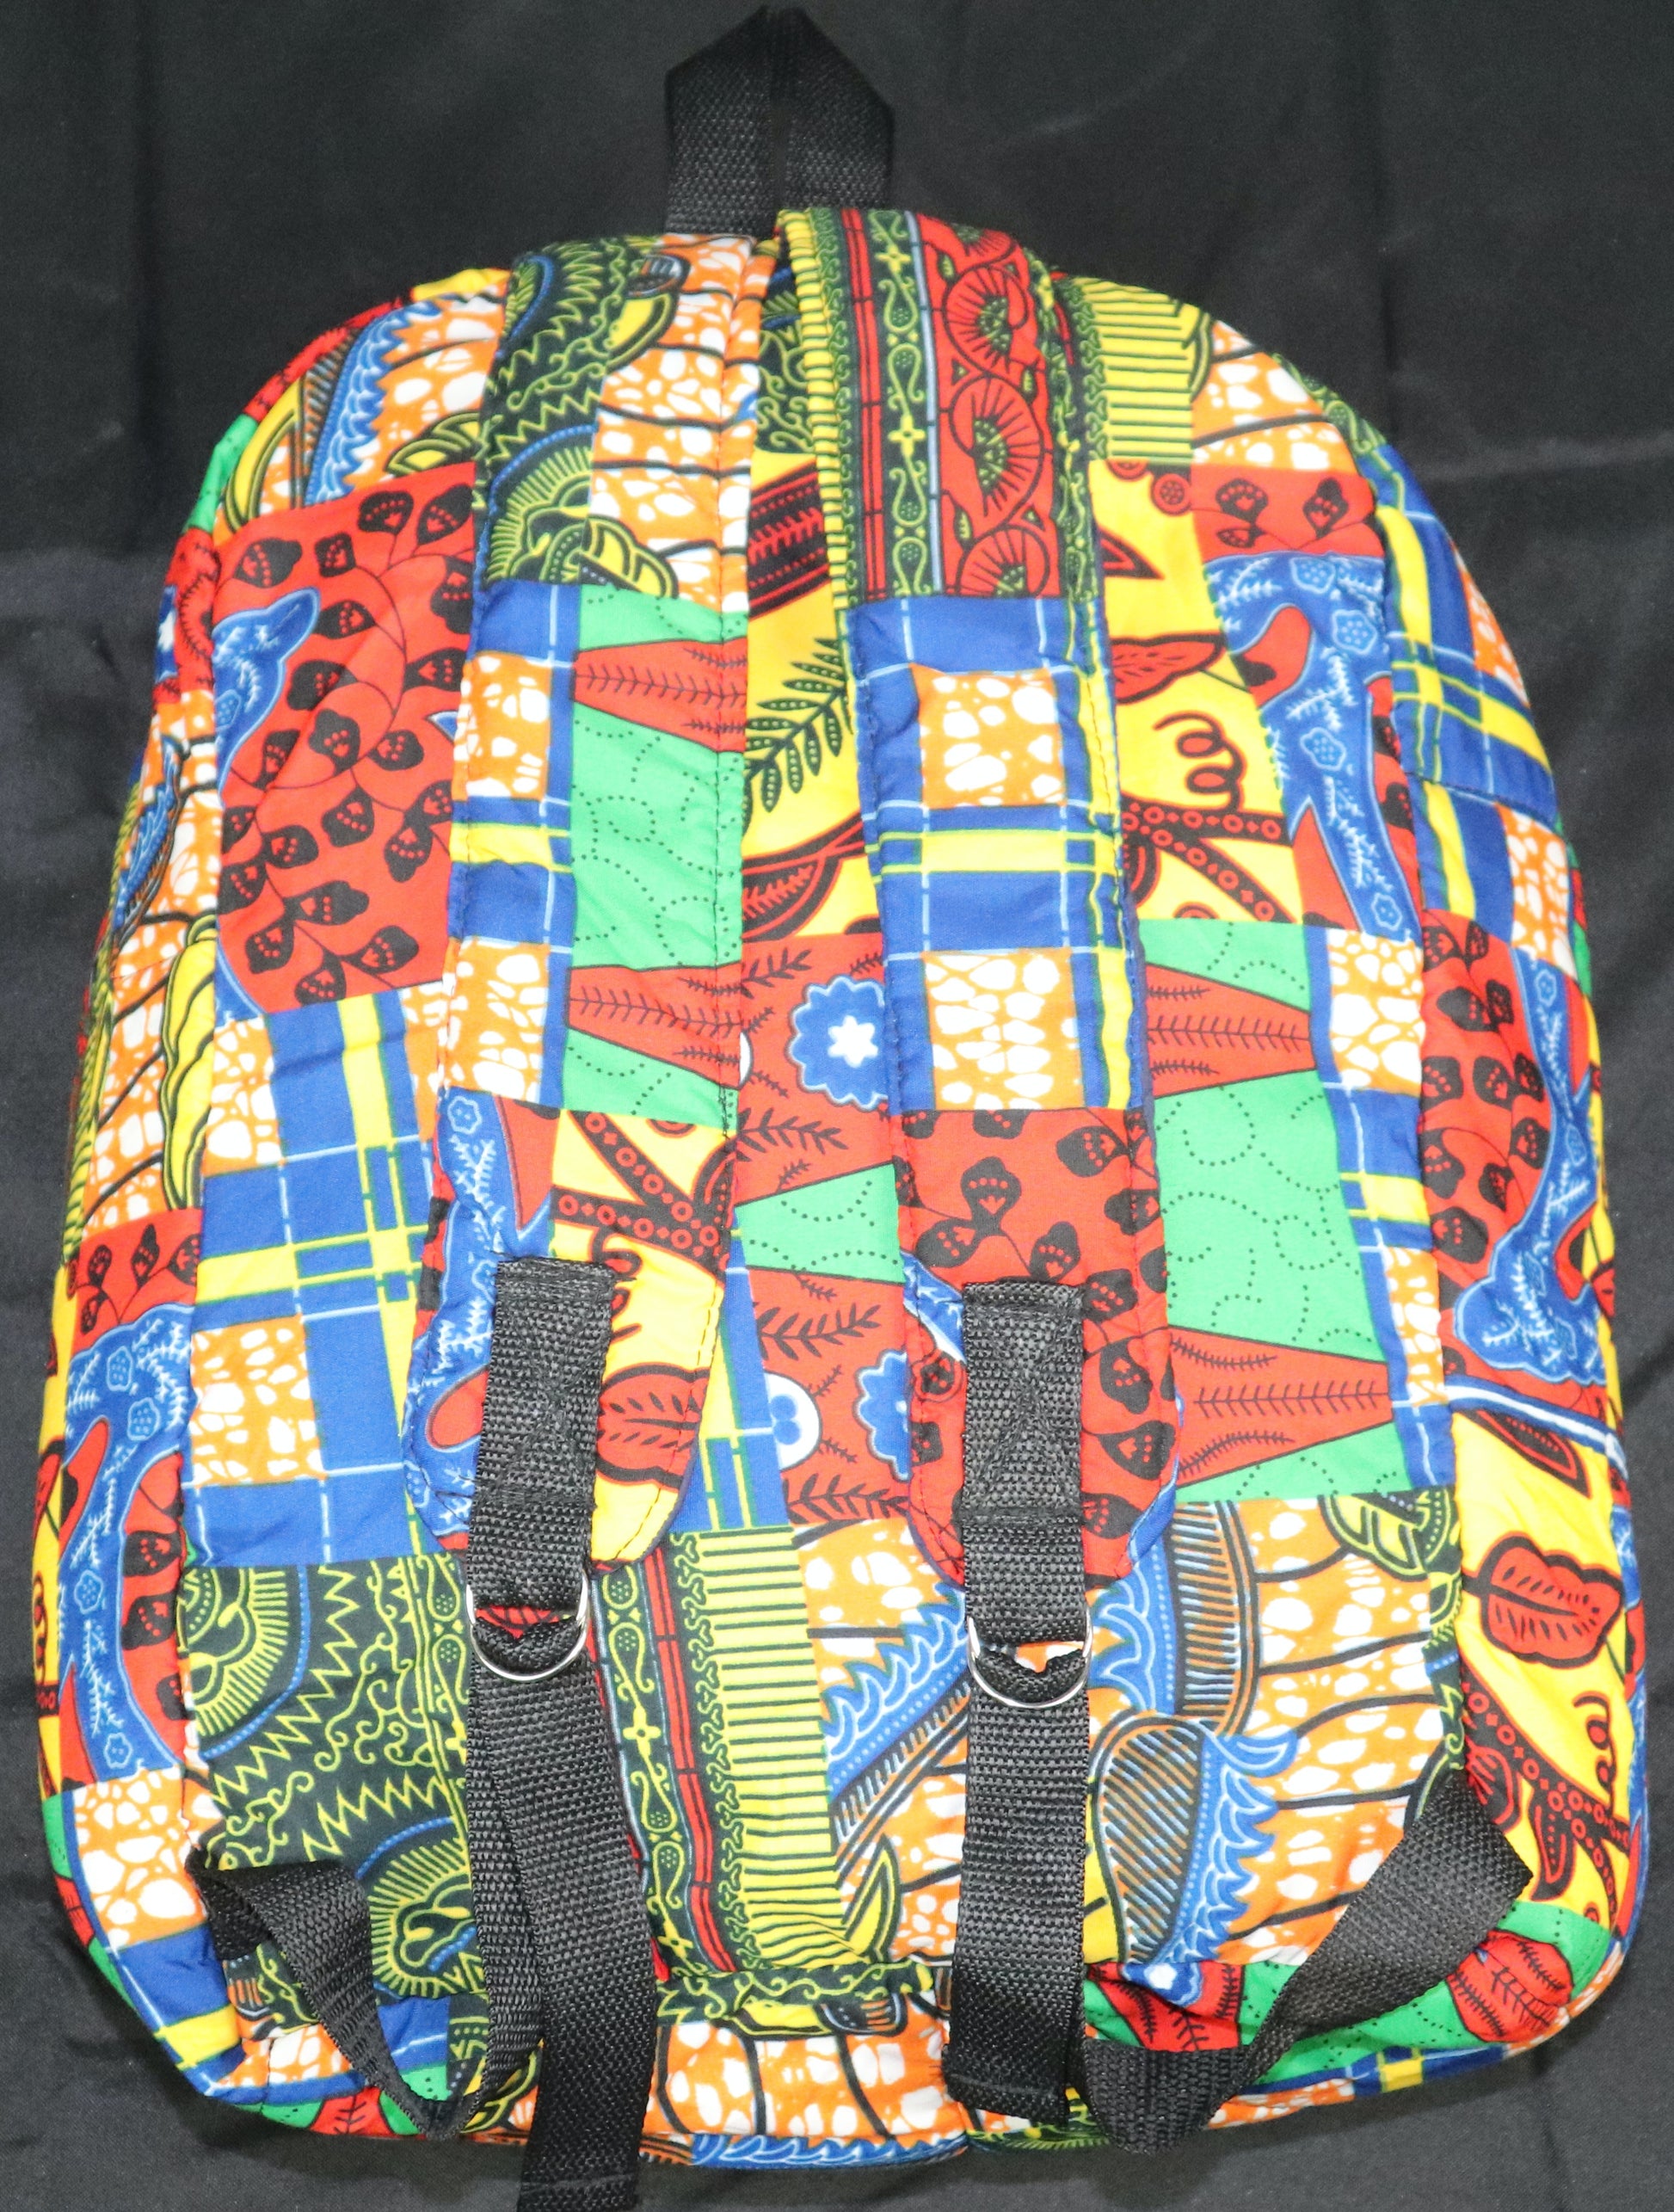 Handcrafted patchwork Ankara fabric backpack. Made in Ghana.